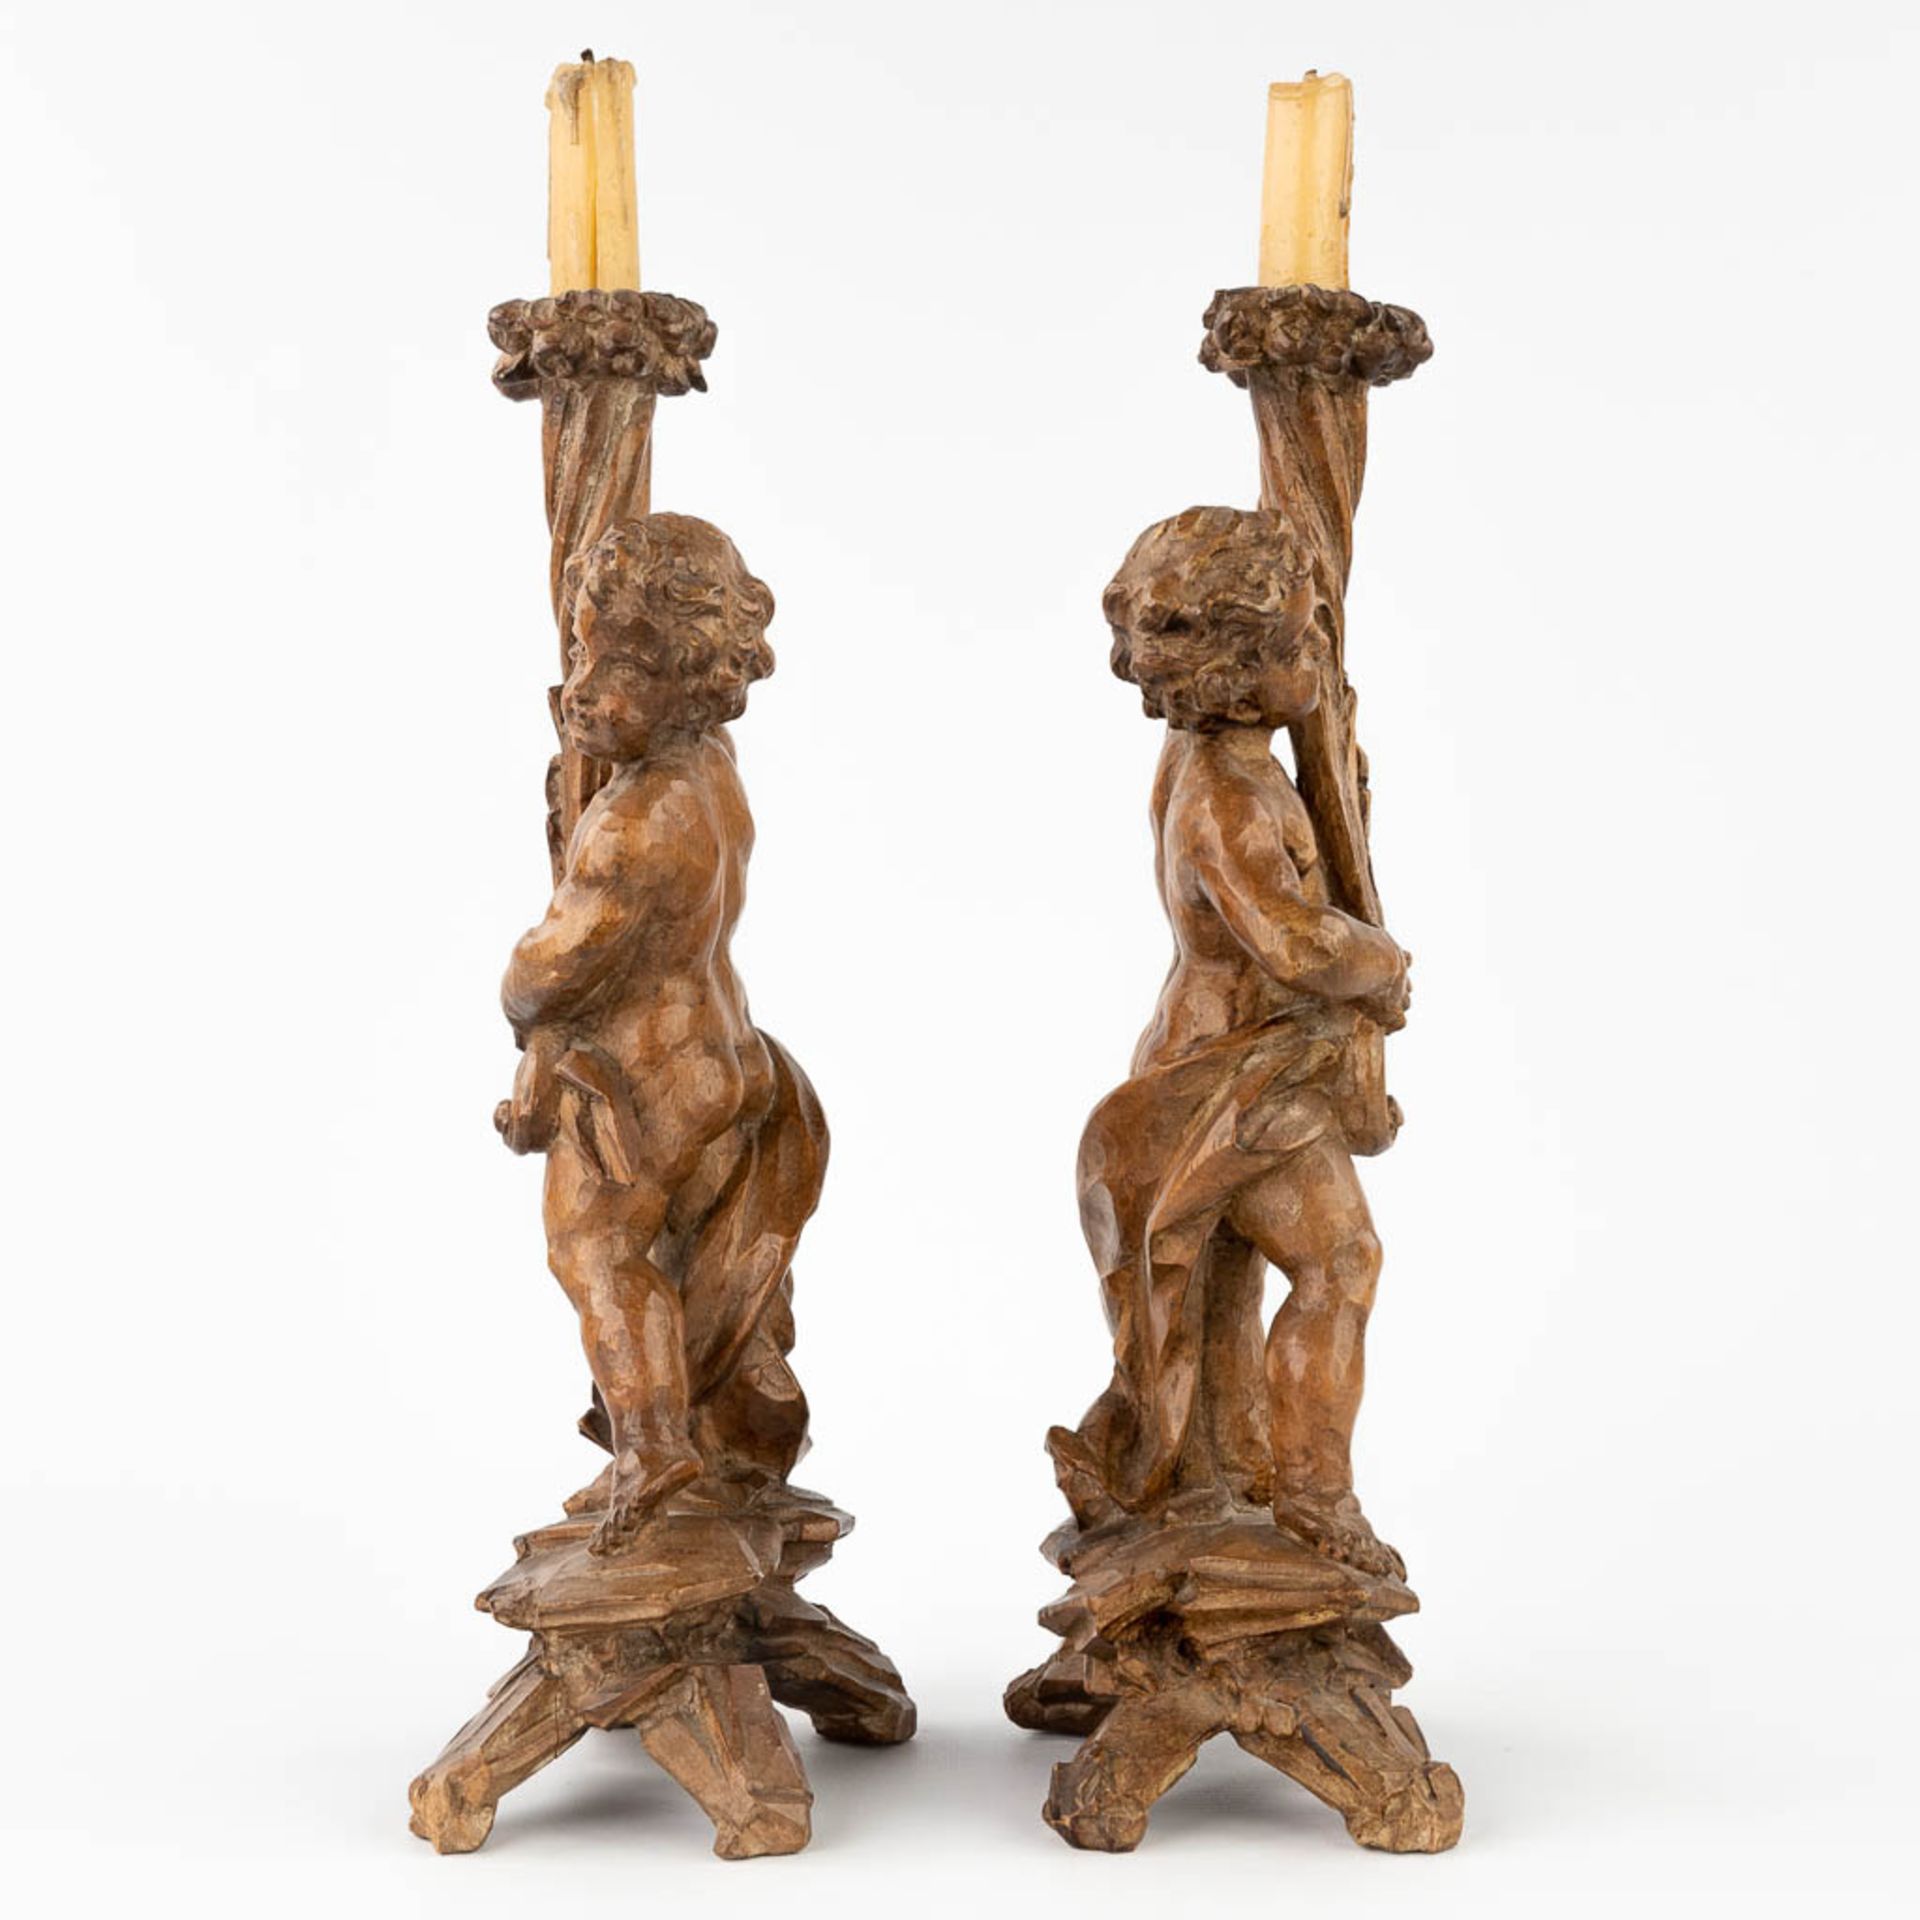 A pair of wood-sculptured candle holders, with putti. 19th C. (L:9 x W:12 x H:34 cm) - Image 3 of 12